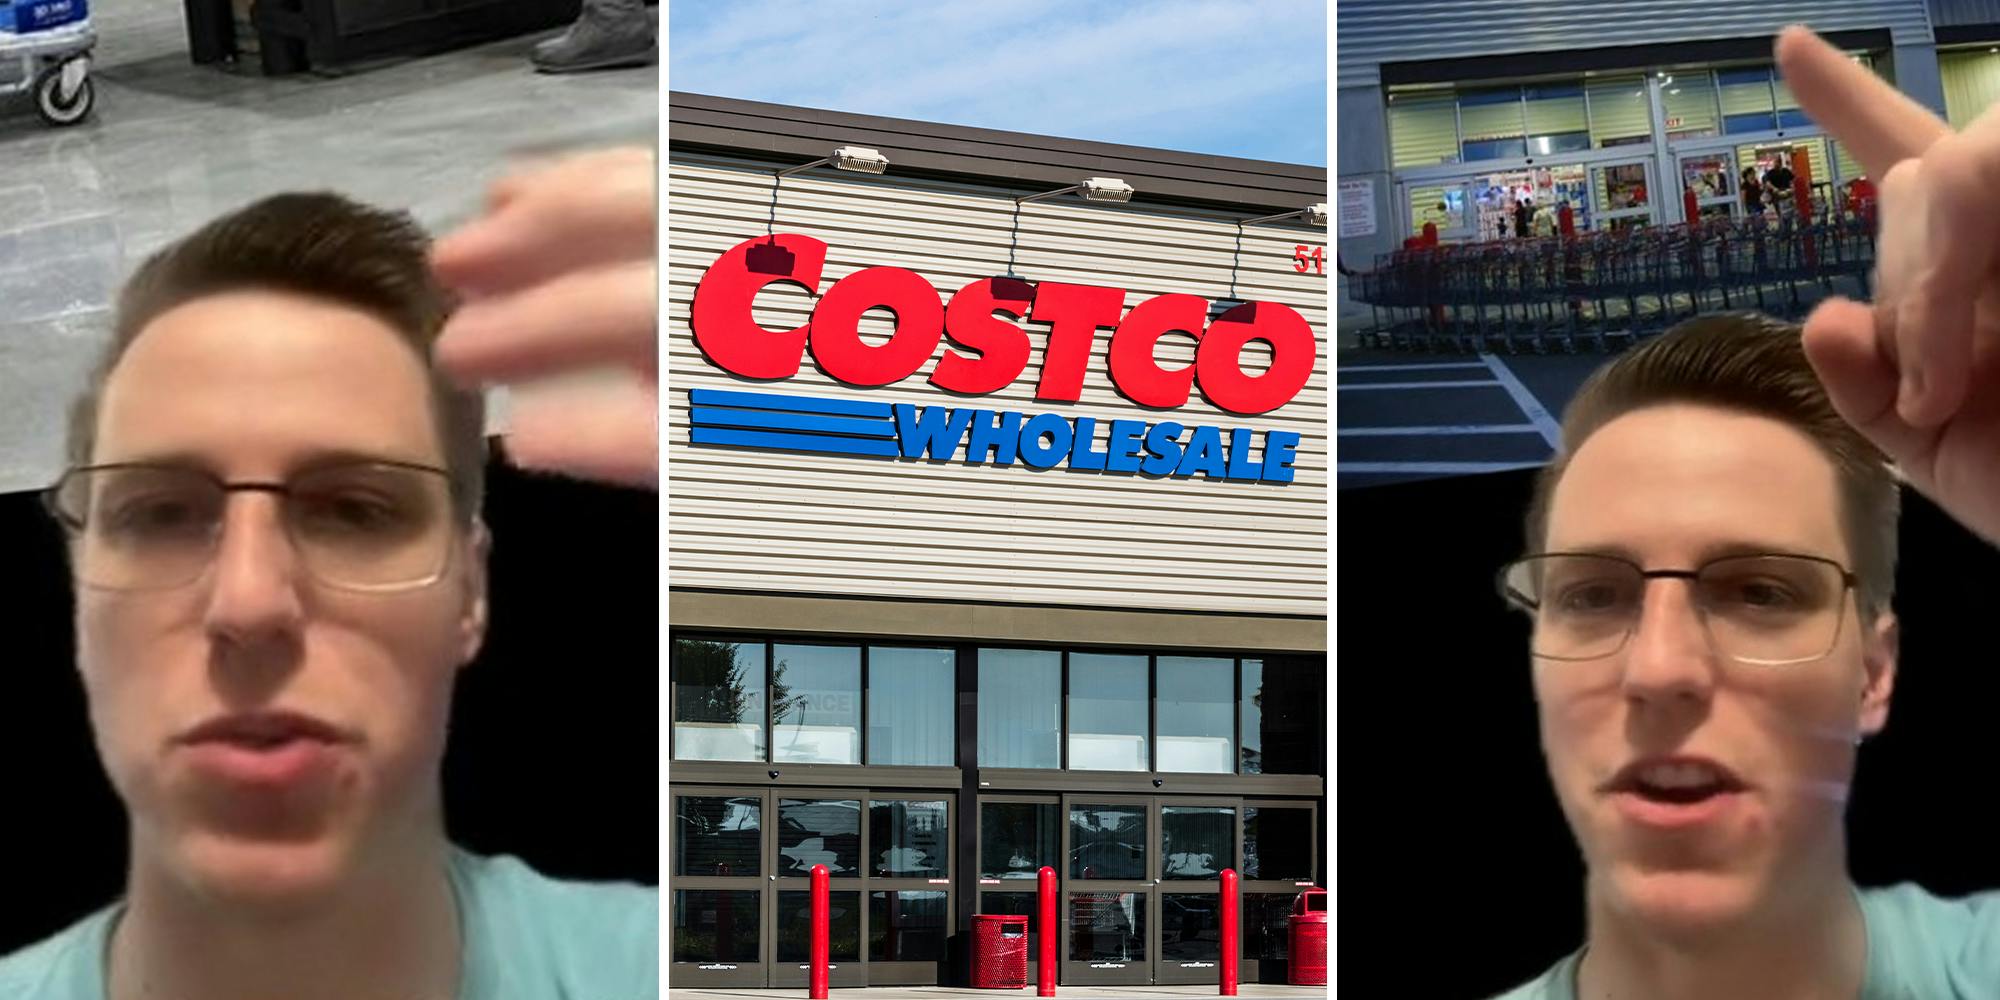 ‘This man essentially borrowed $1,400’: Costco shopper returns playground set from 2008 because his ‘kids grew up.’ He got a full refund